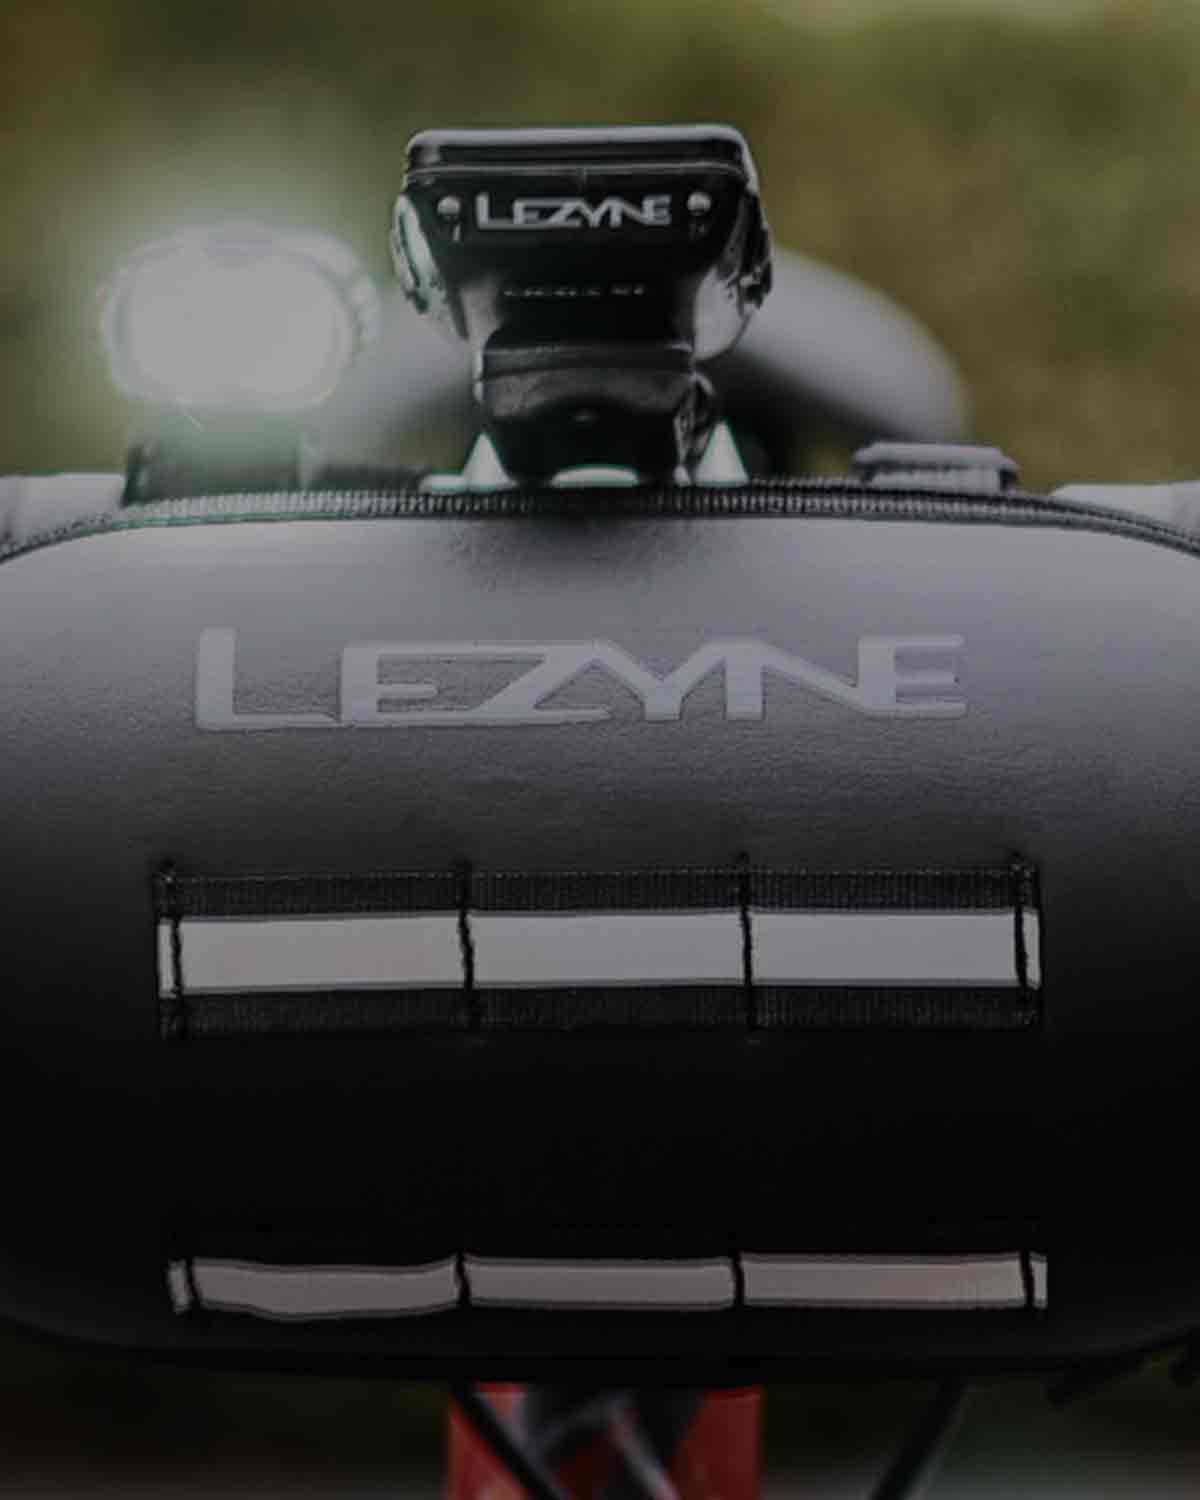 A bag mounted to bicycle handlebars with the word Lezyne printed on it.